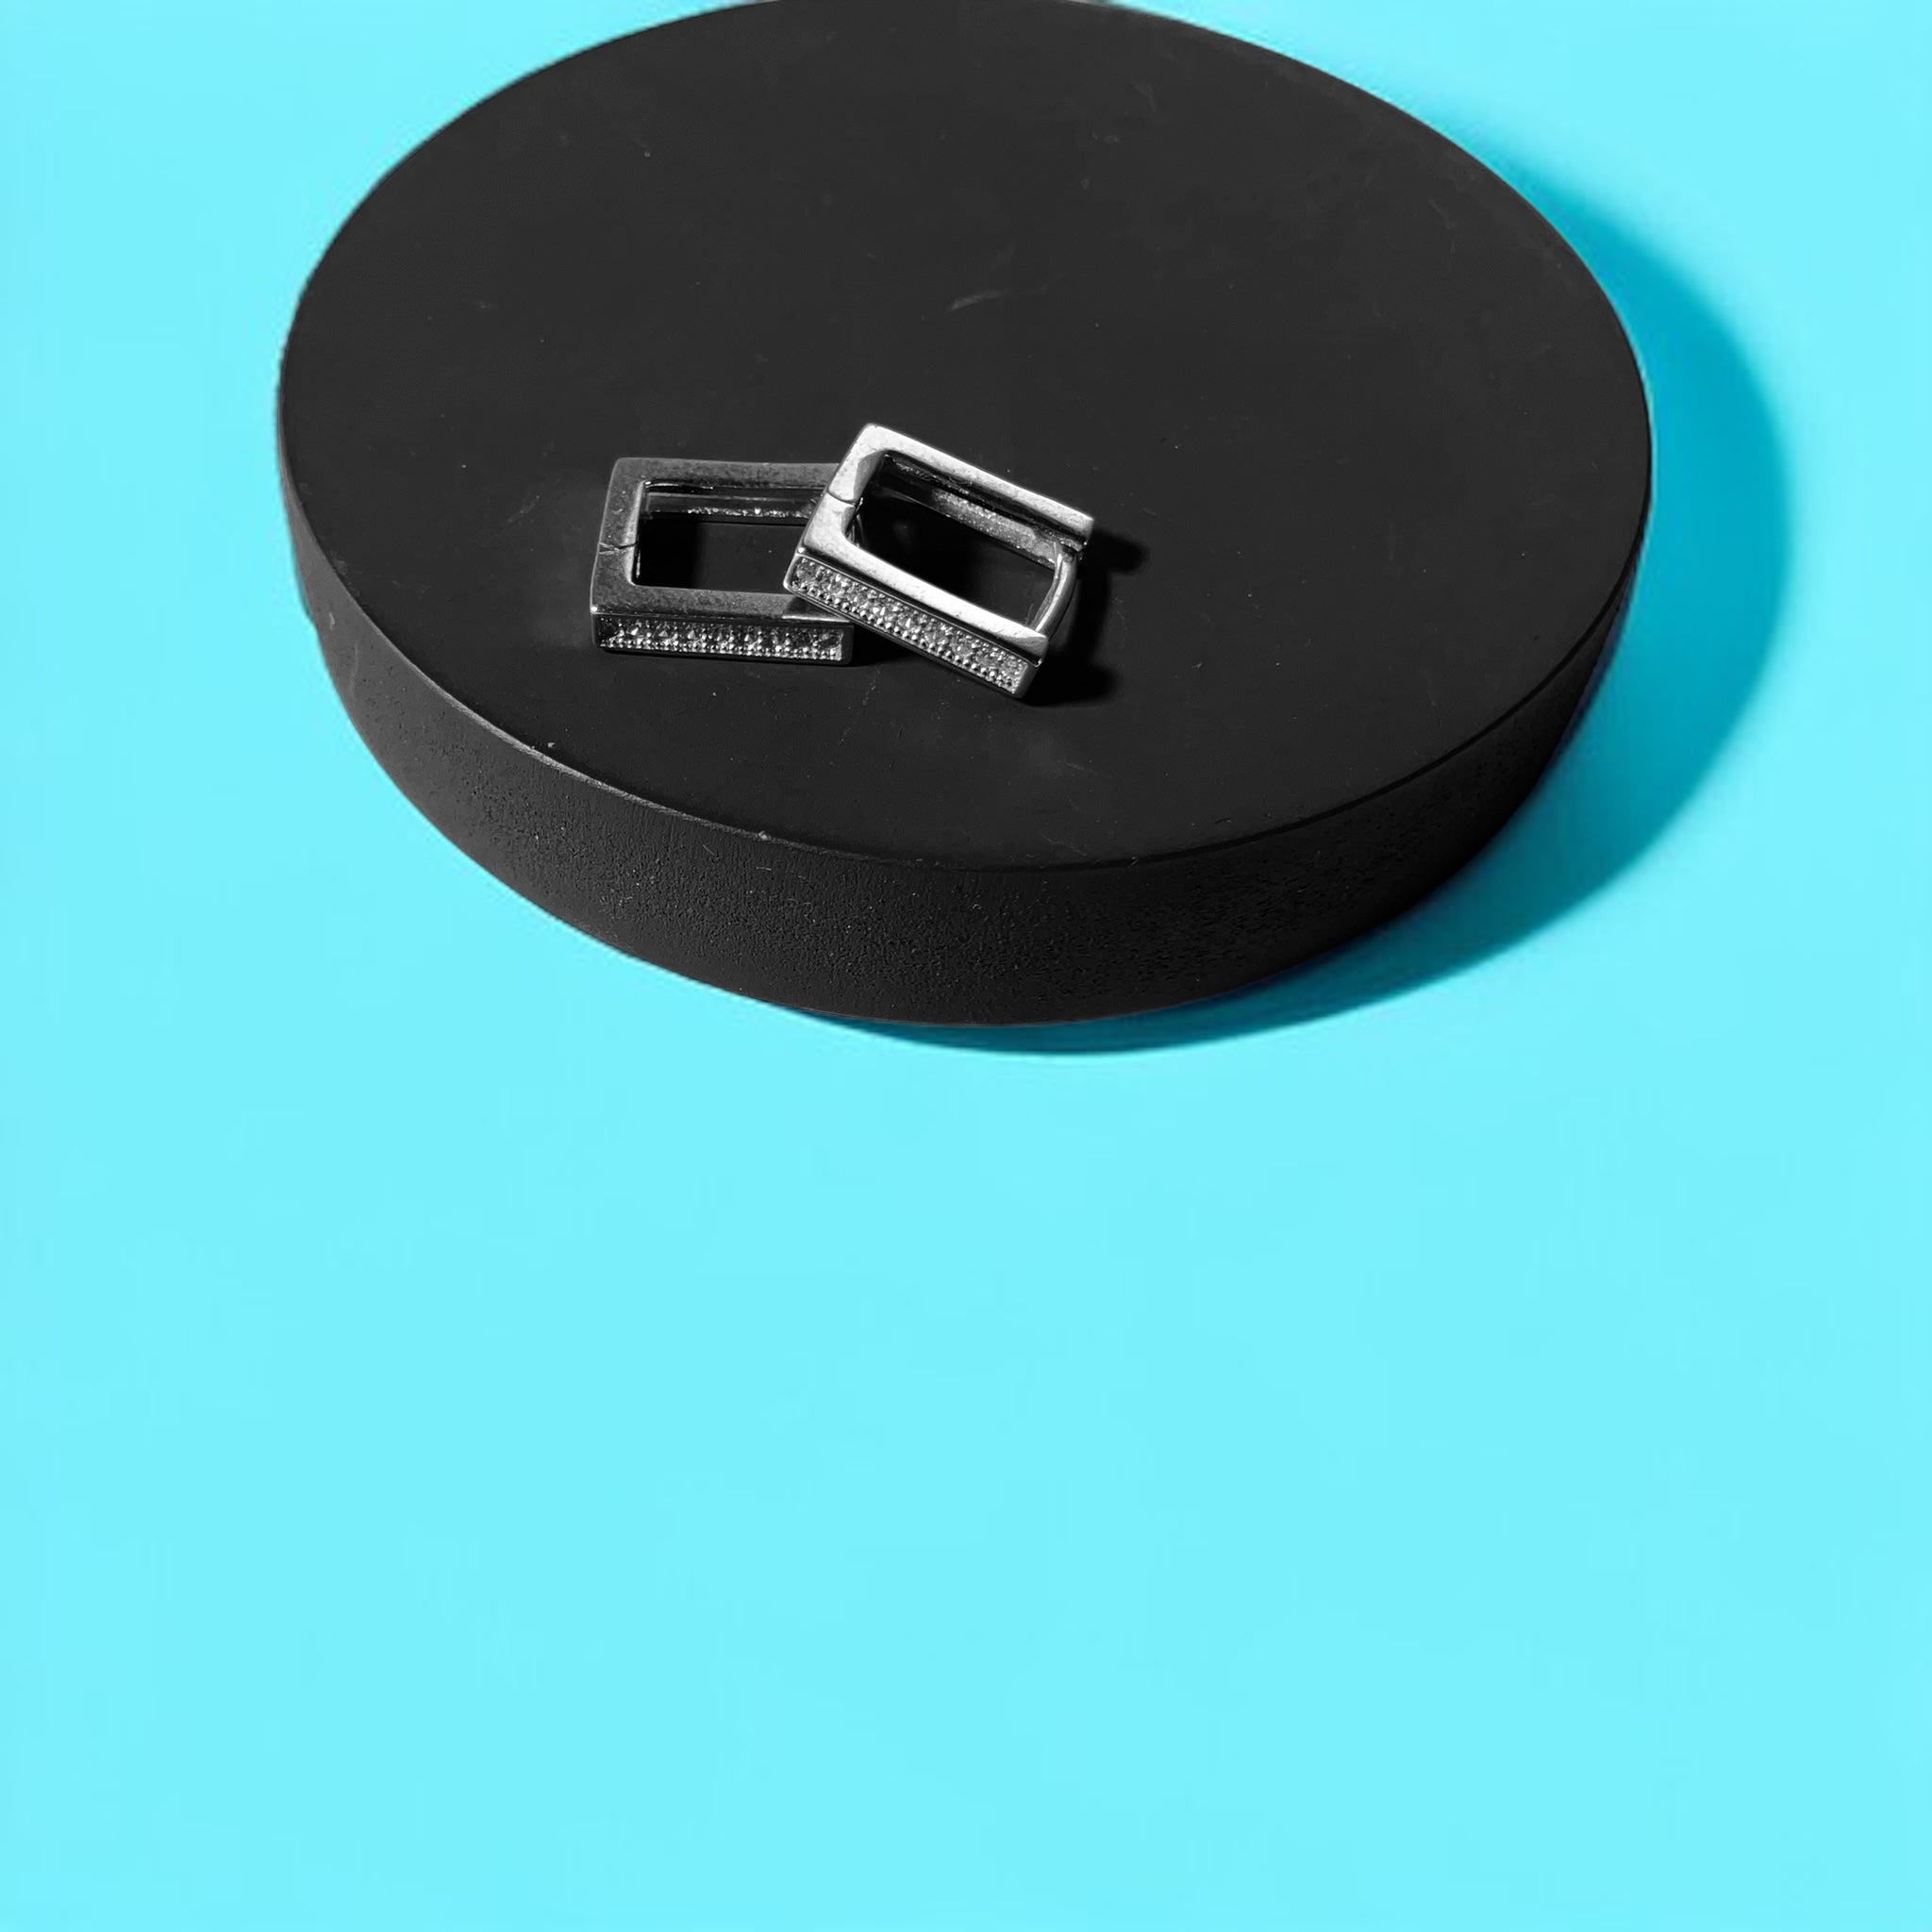 a black object with a metal buckle on a blue background